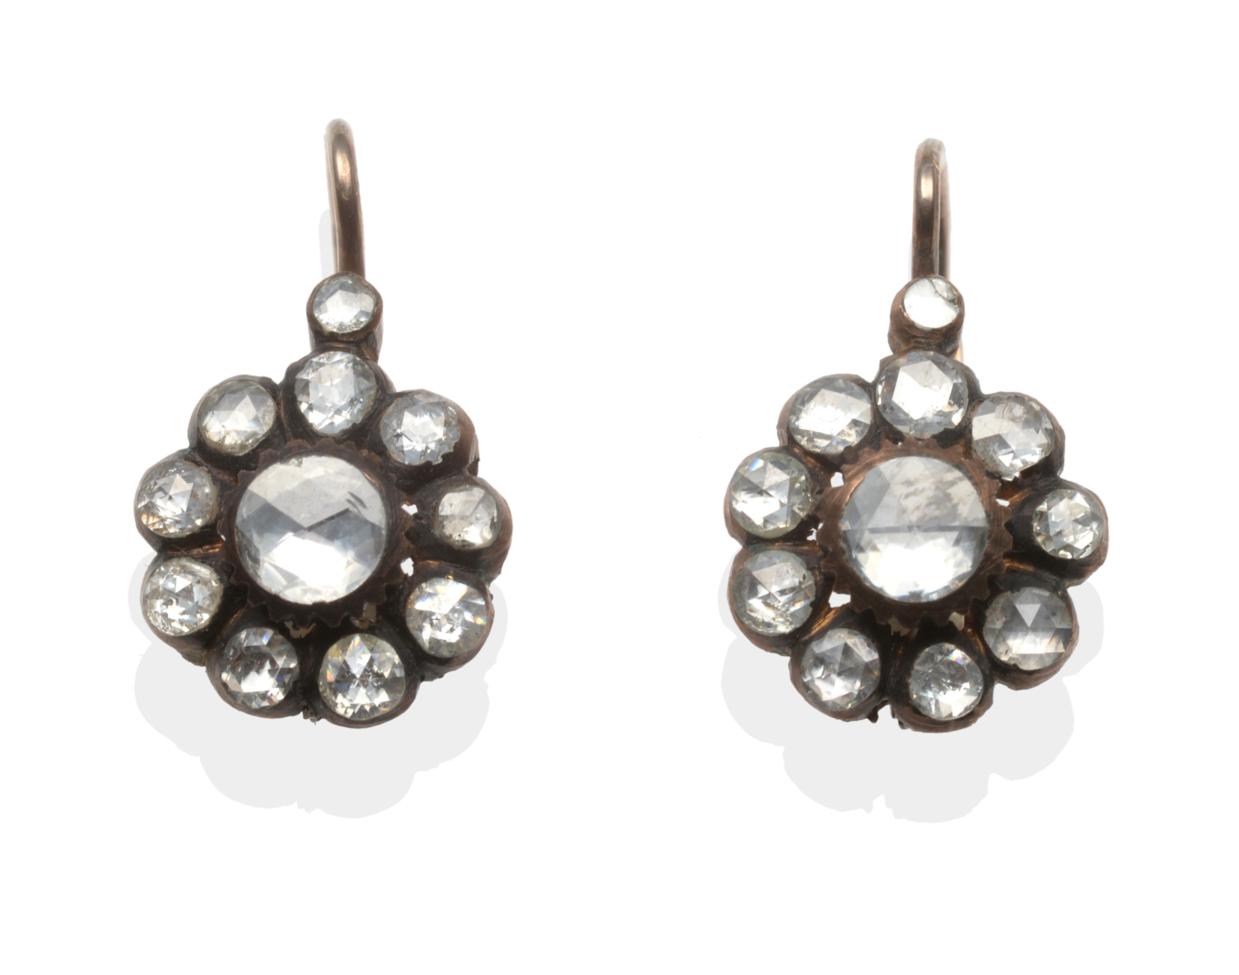 A Pair of Diamond Cluster Earrings, a rose cut diamond within a border of smaller rose cut